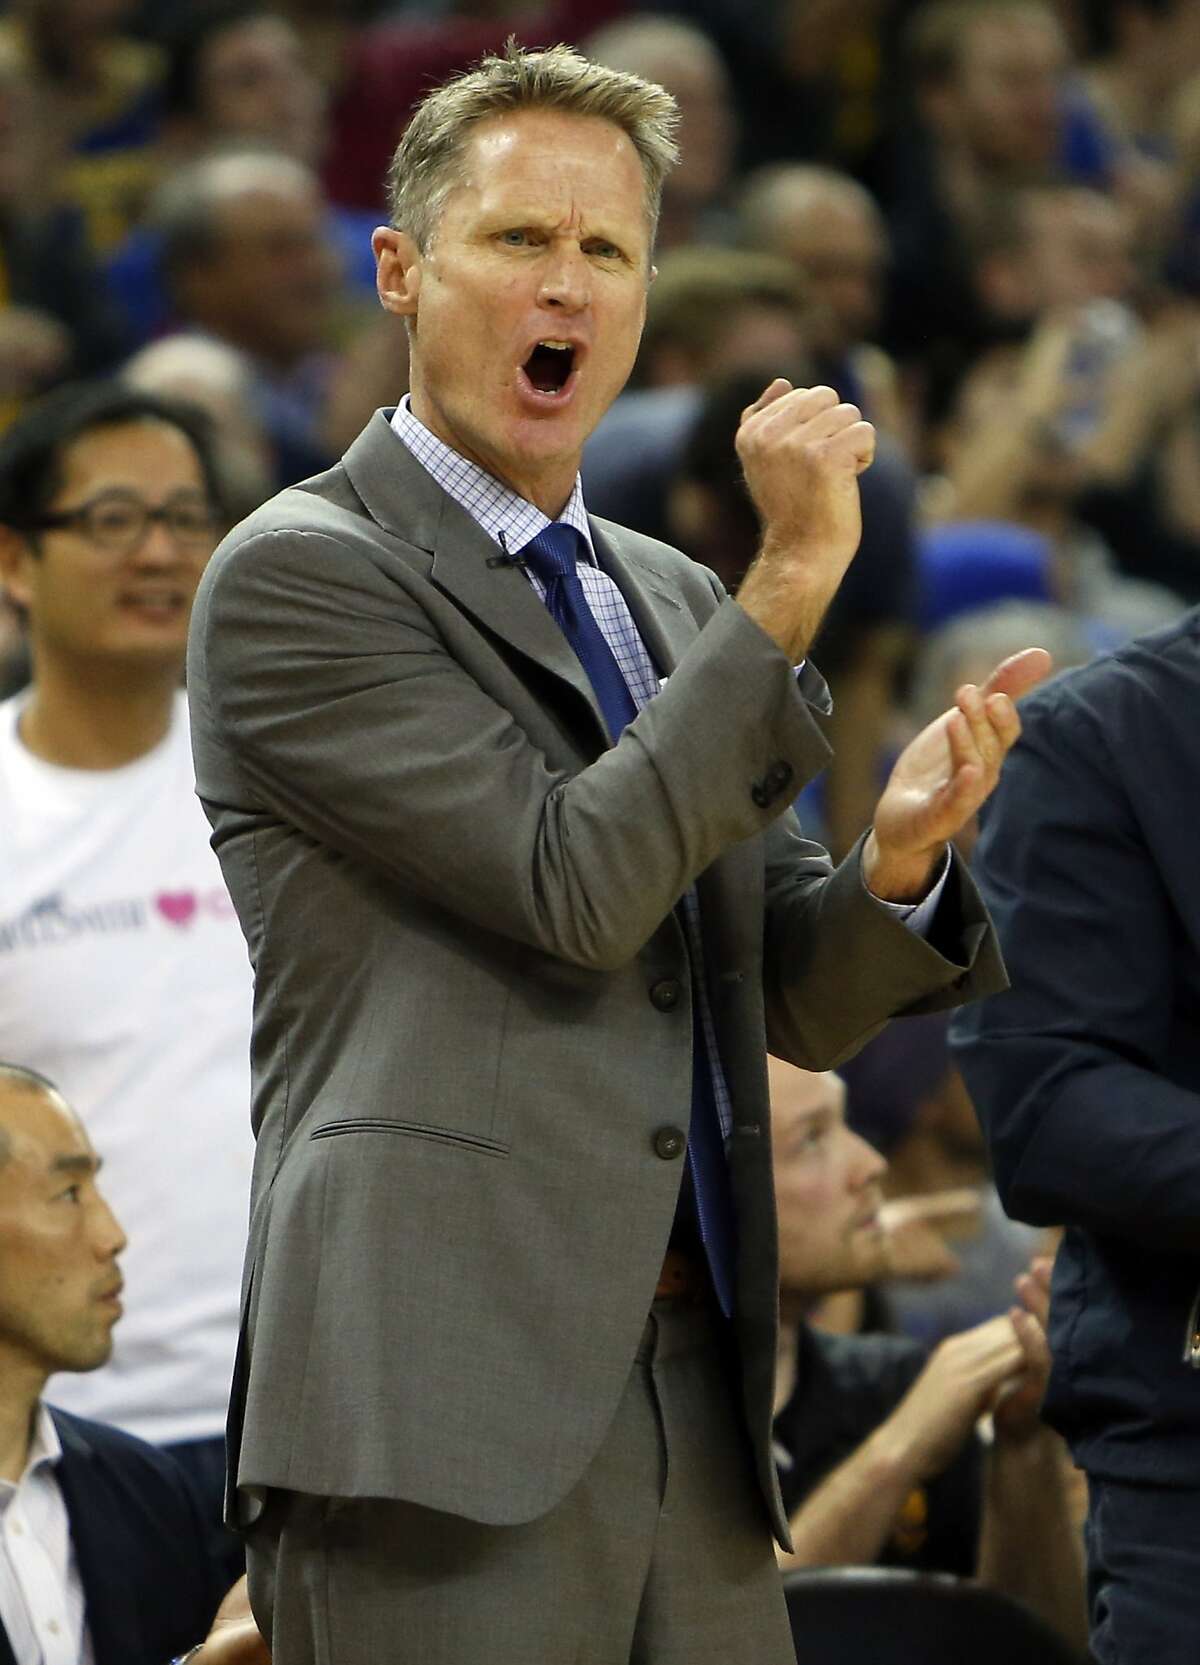 Golden State Warriors' head coach Steve Kerr complains about a non-call in 2nd quarter against Cleveland Cavaliers during NBA game at Oracle Arena in Oakland, Calif. on Friday, January 9, 2015.